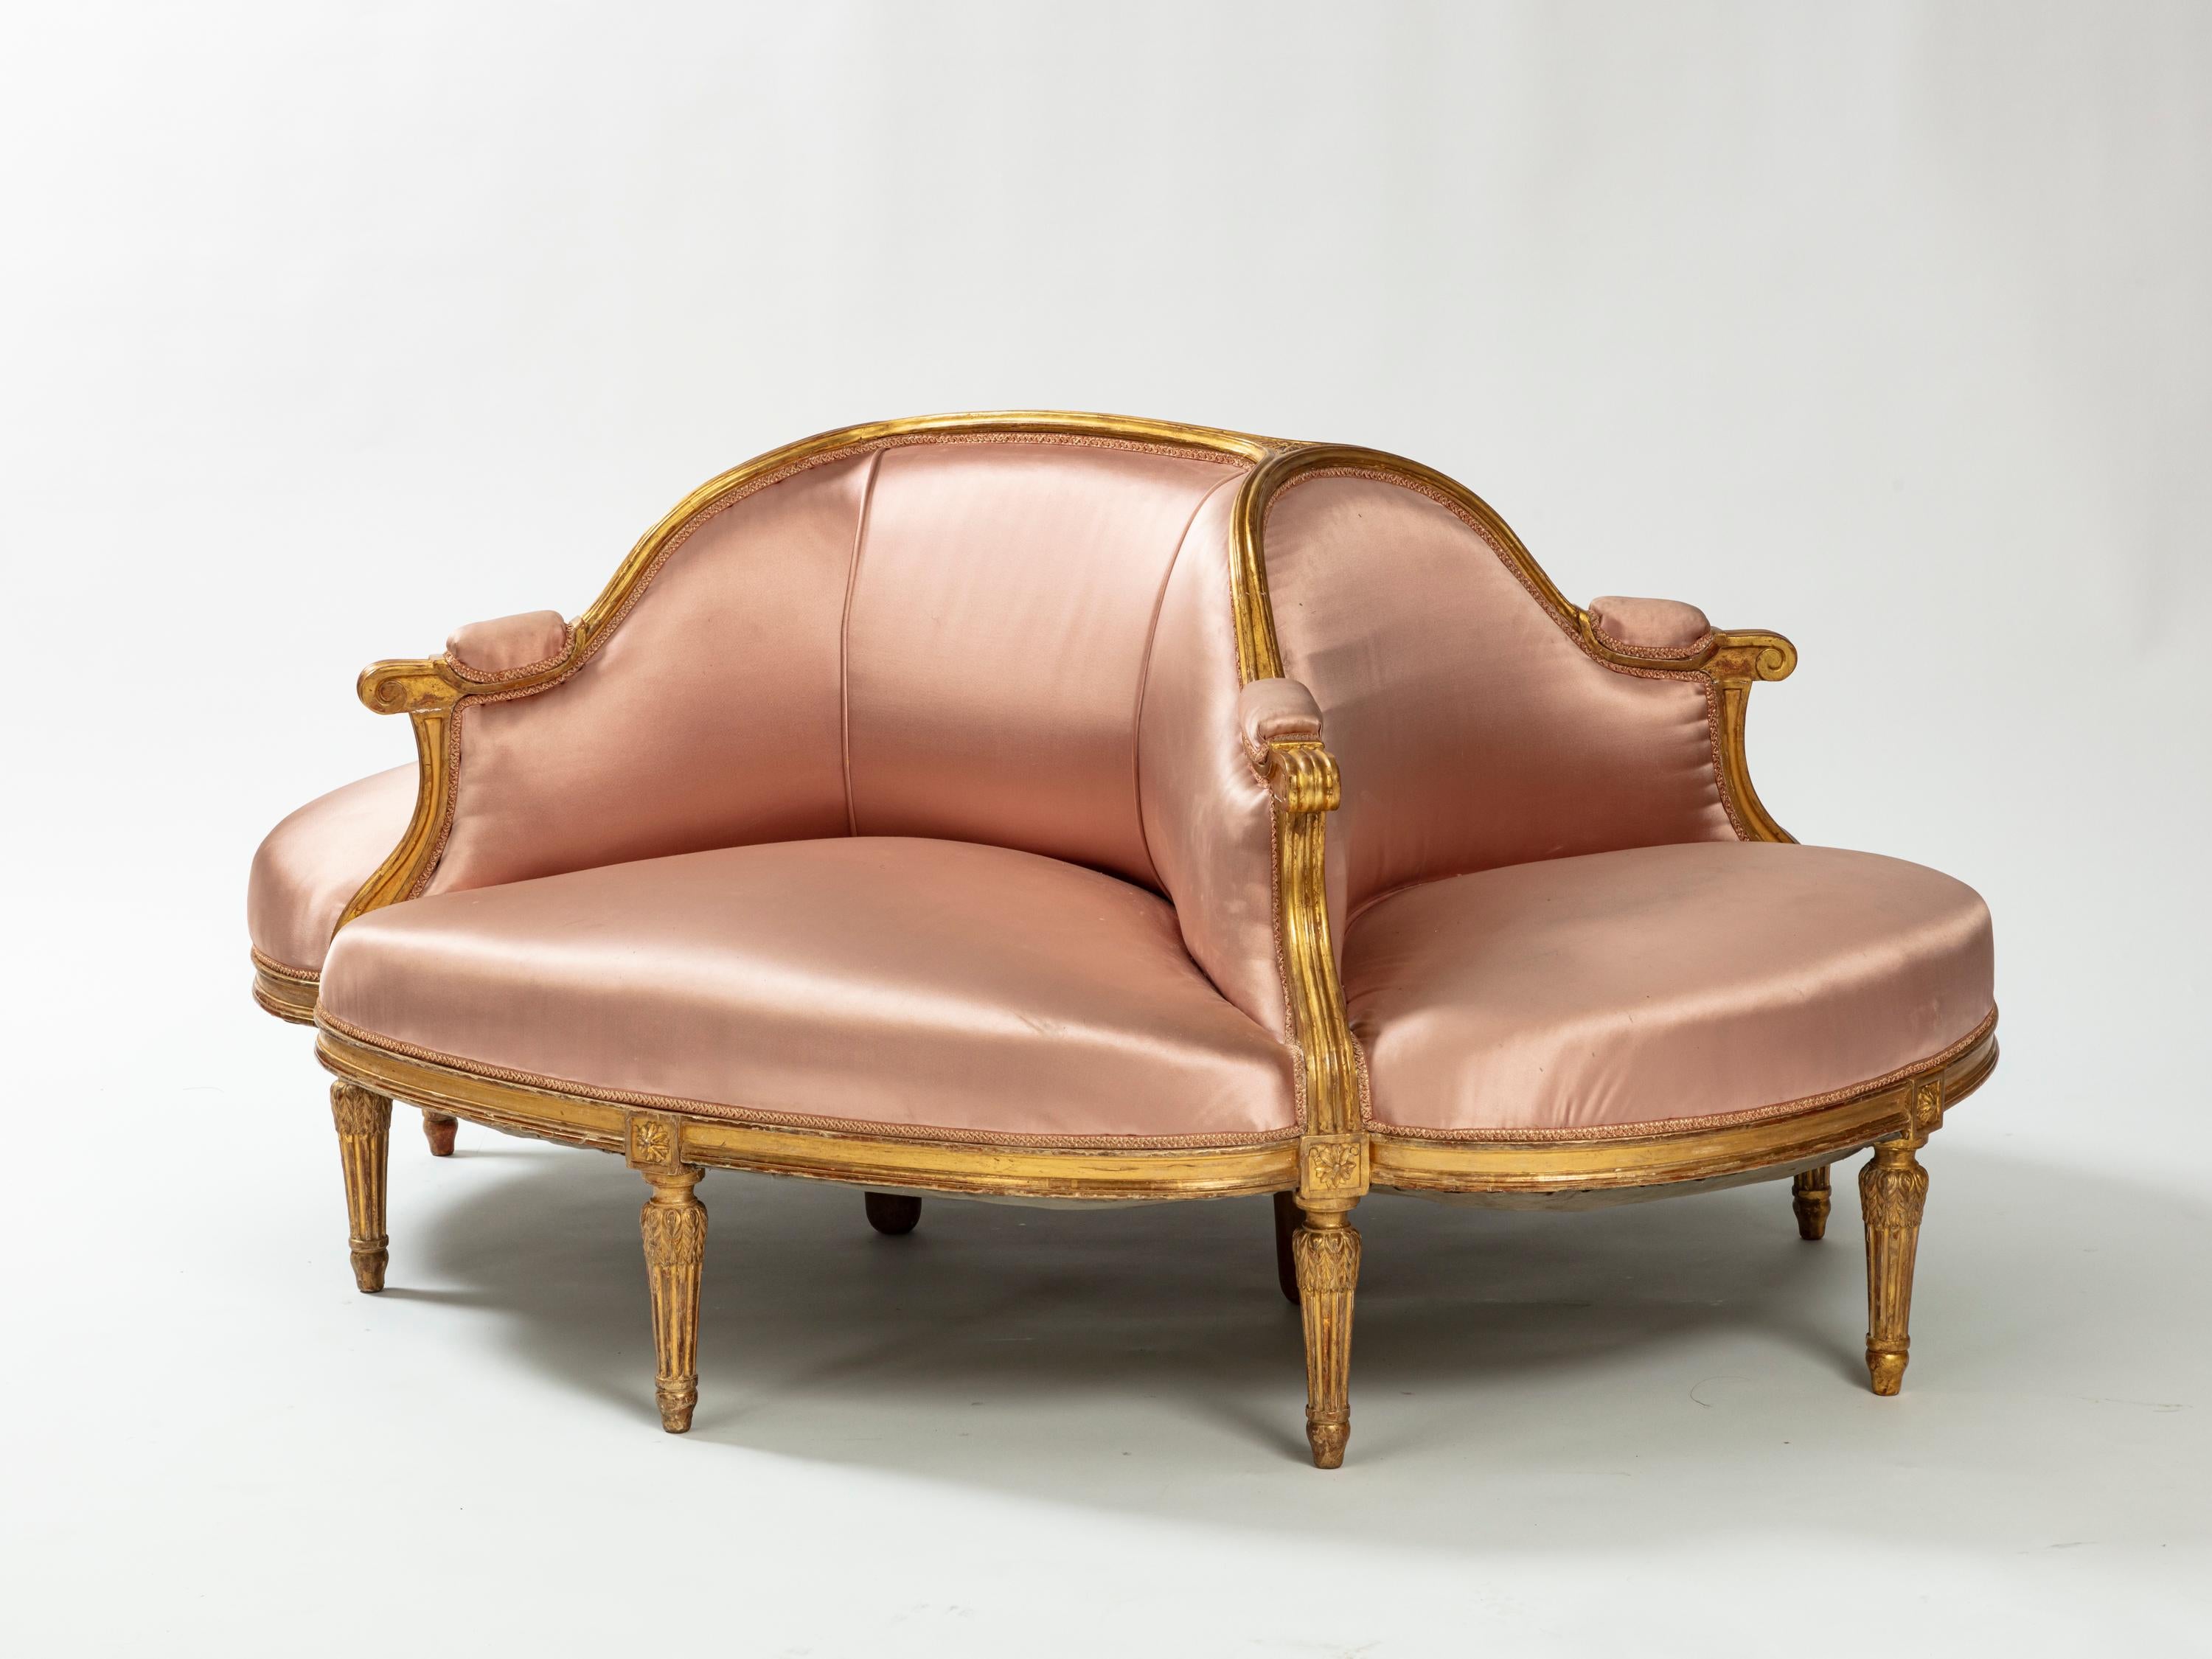 A central seat, also called “borne” from the Napoleon III period, circa 1860. Gilt wood frame, upholstered with beige rose satin silk fabric.